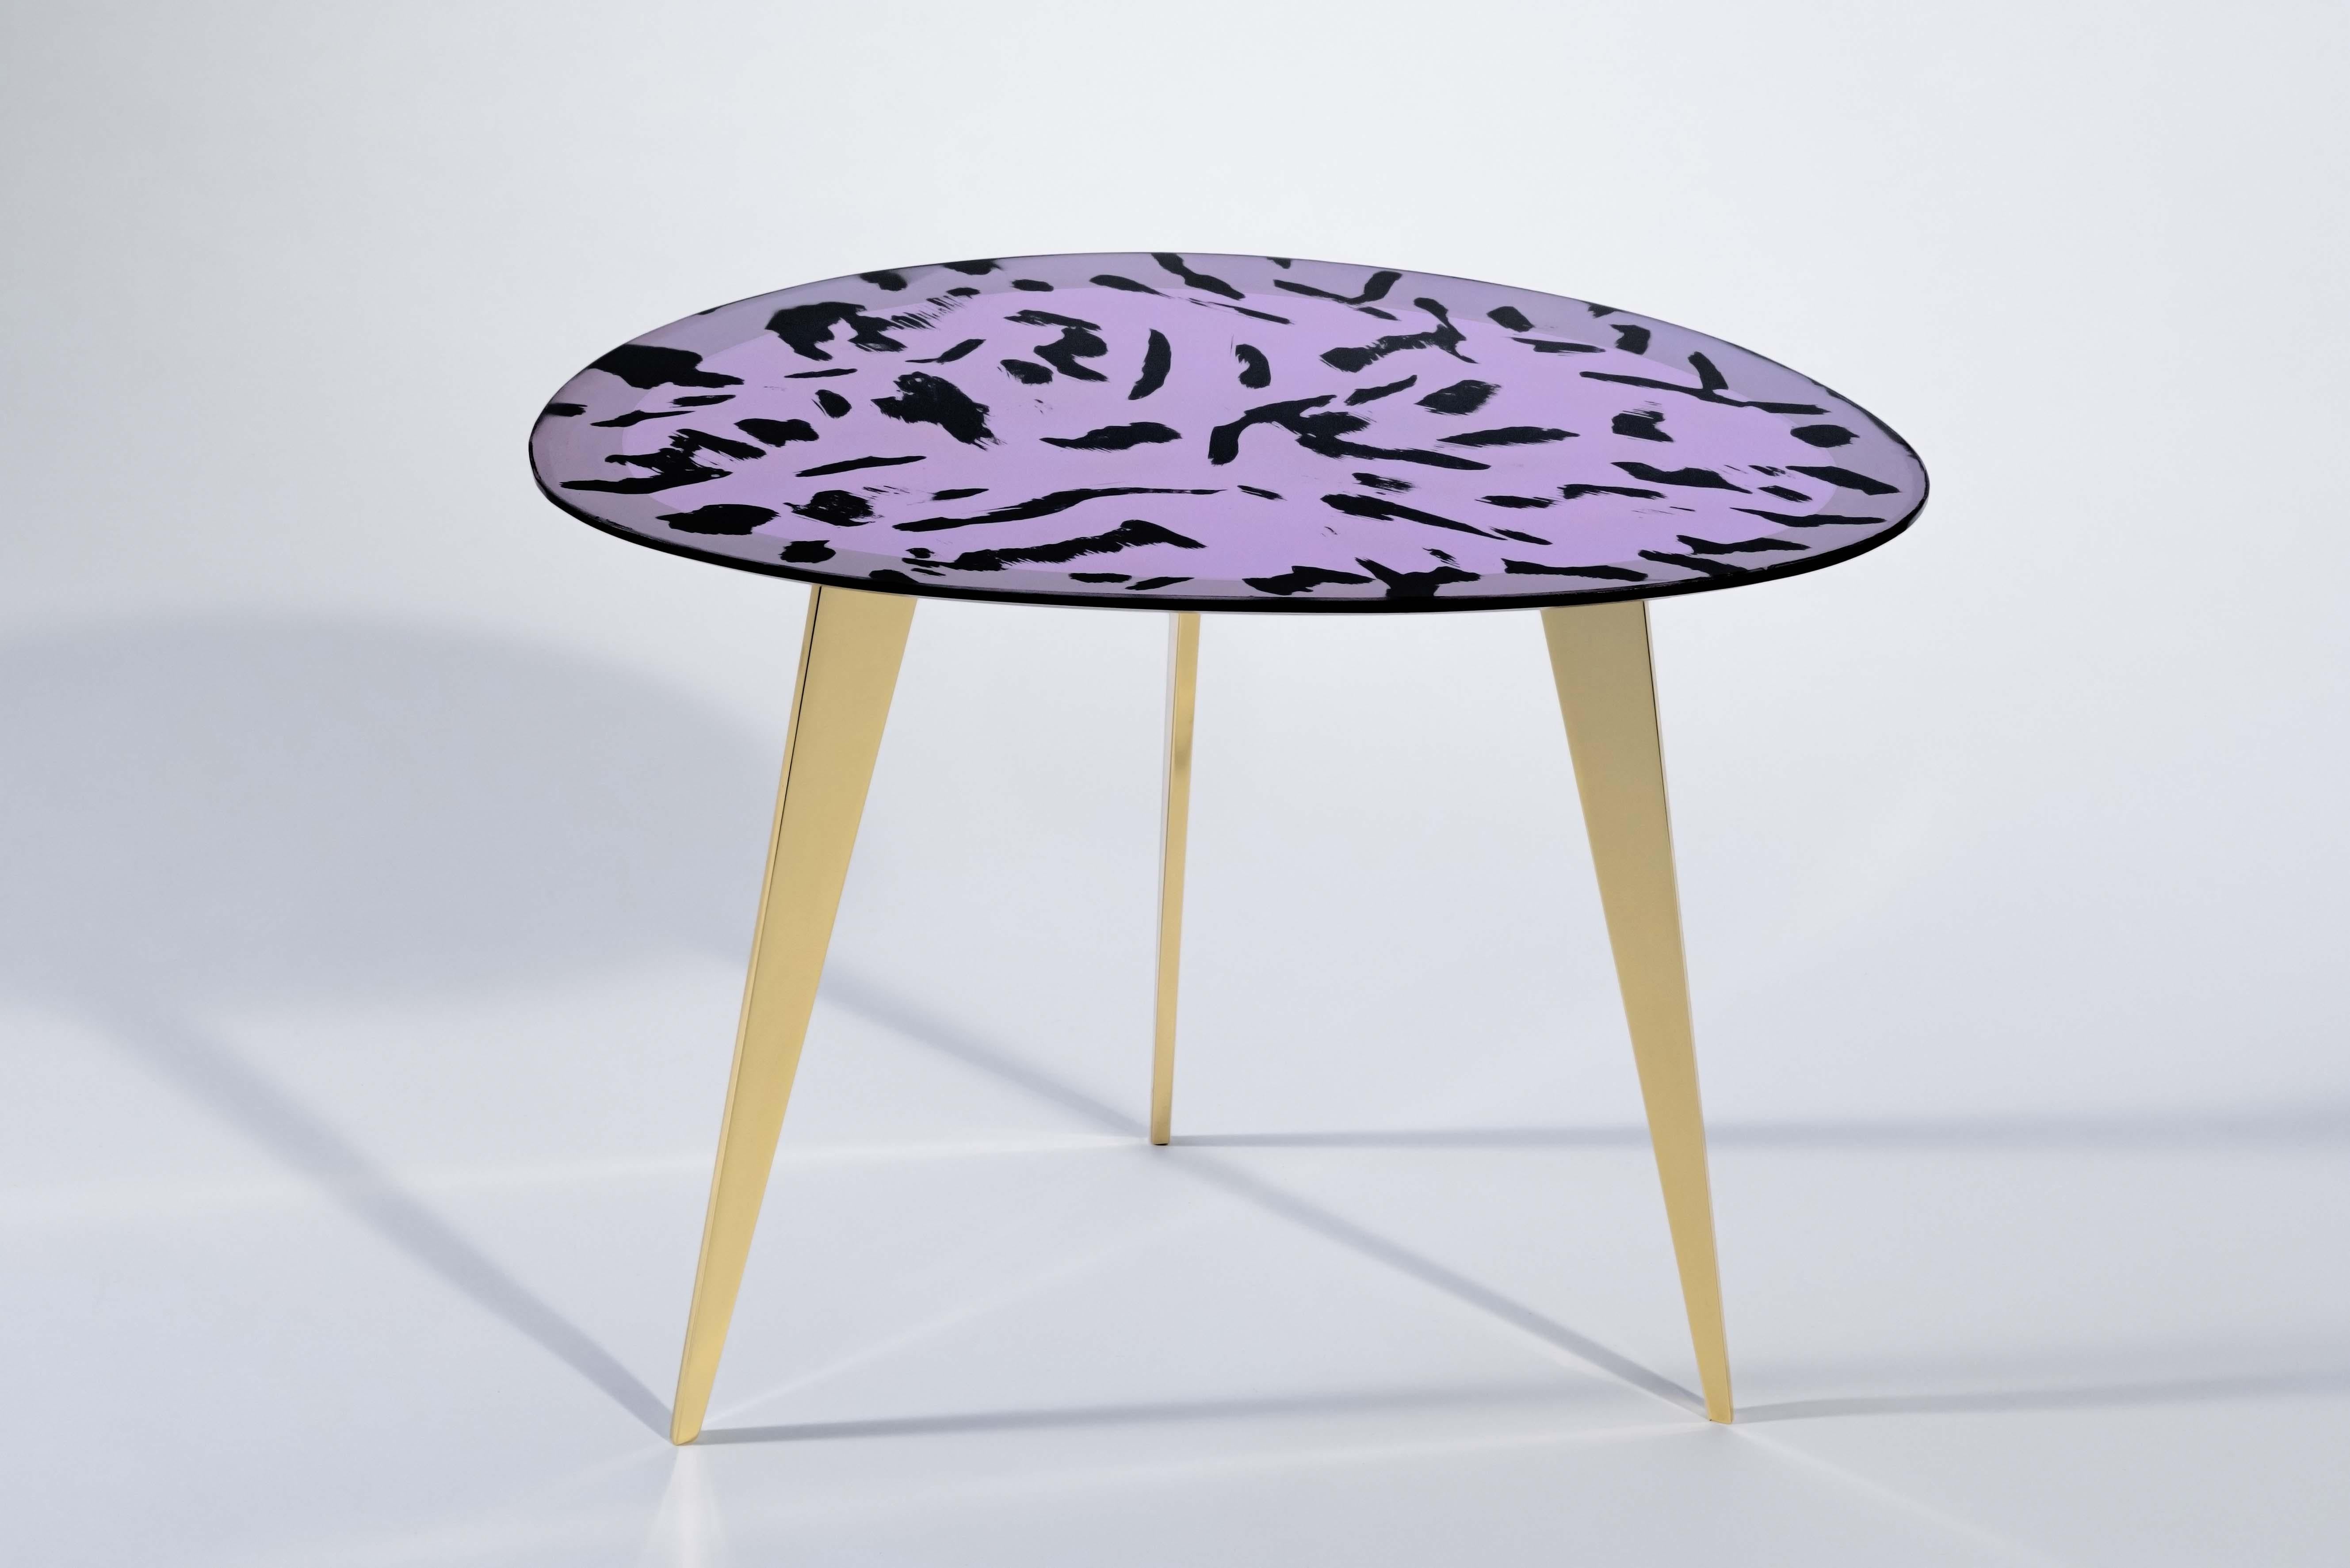 Italian Contemporary 'Puà' Coffee Table Pink Crystal and Polished Brass by Ghirò Studio For Sale